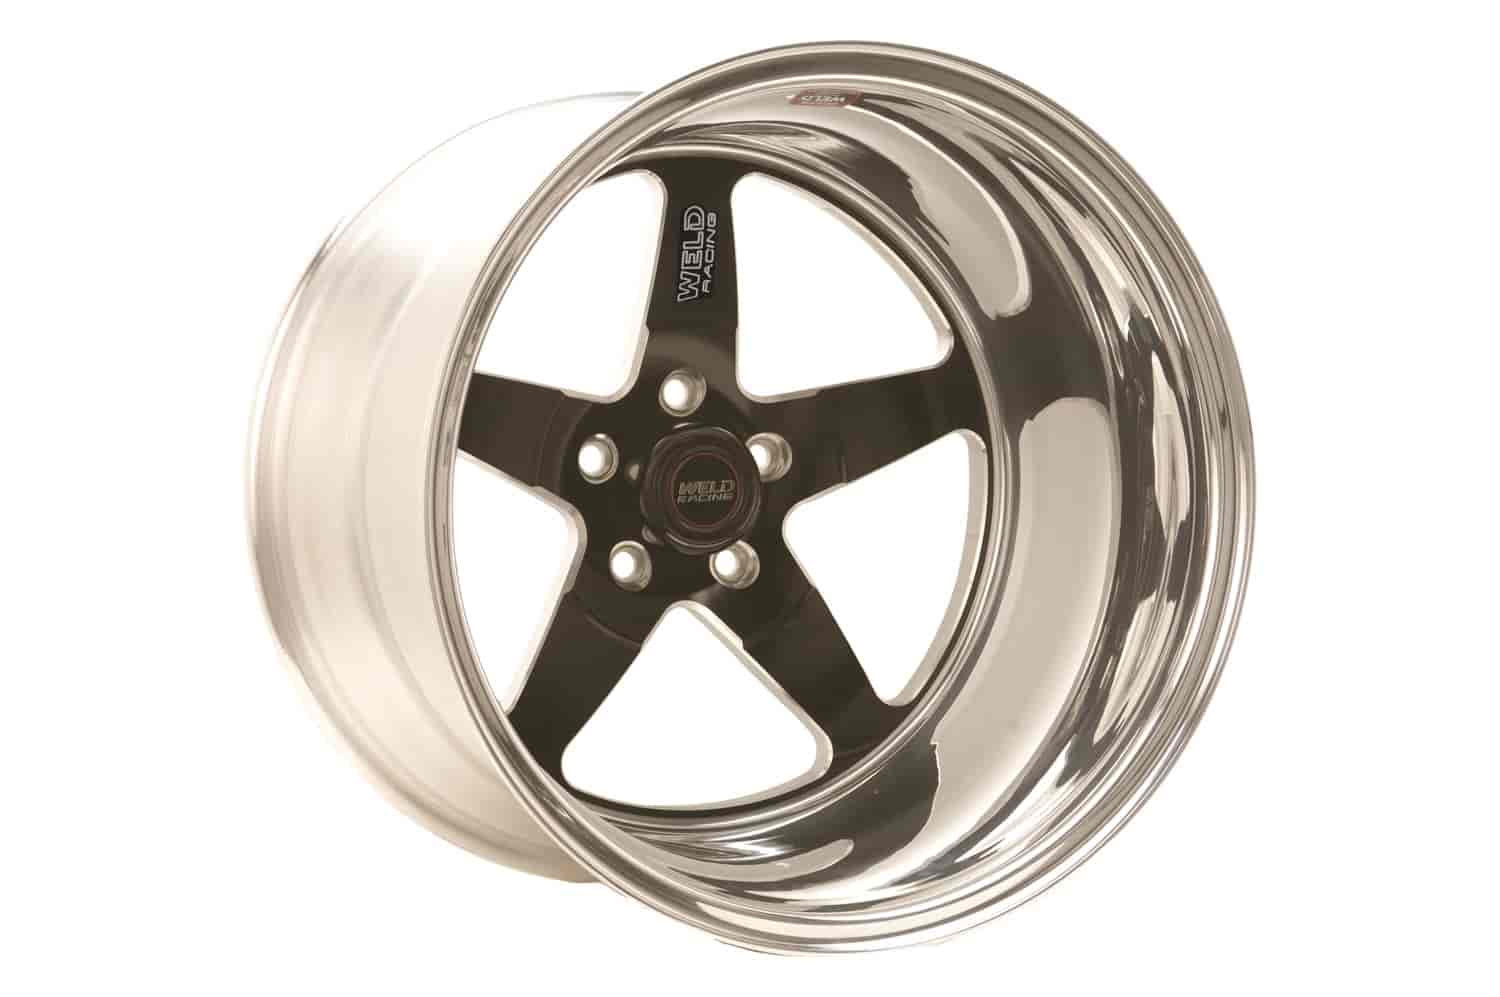 RT-S Series Wheel Size: 15" x 8" Bolt Circle: 5 x 4-1/2" Back Space: 5-1/2"